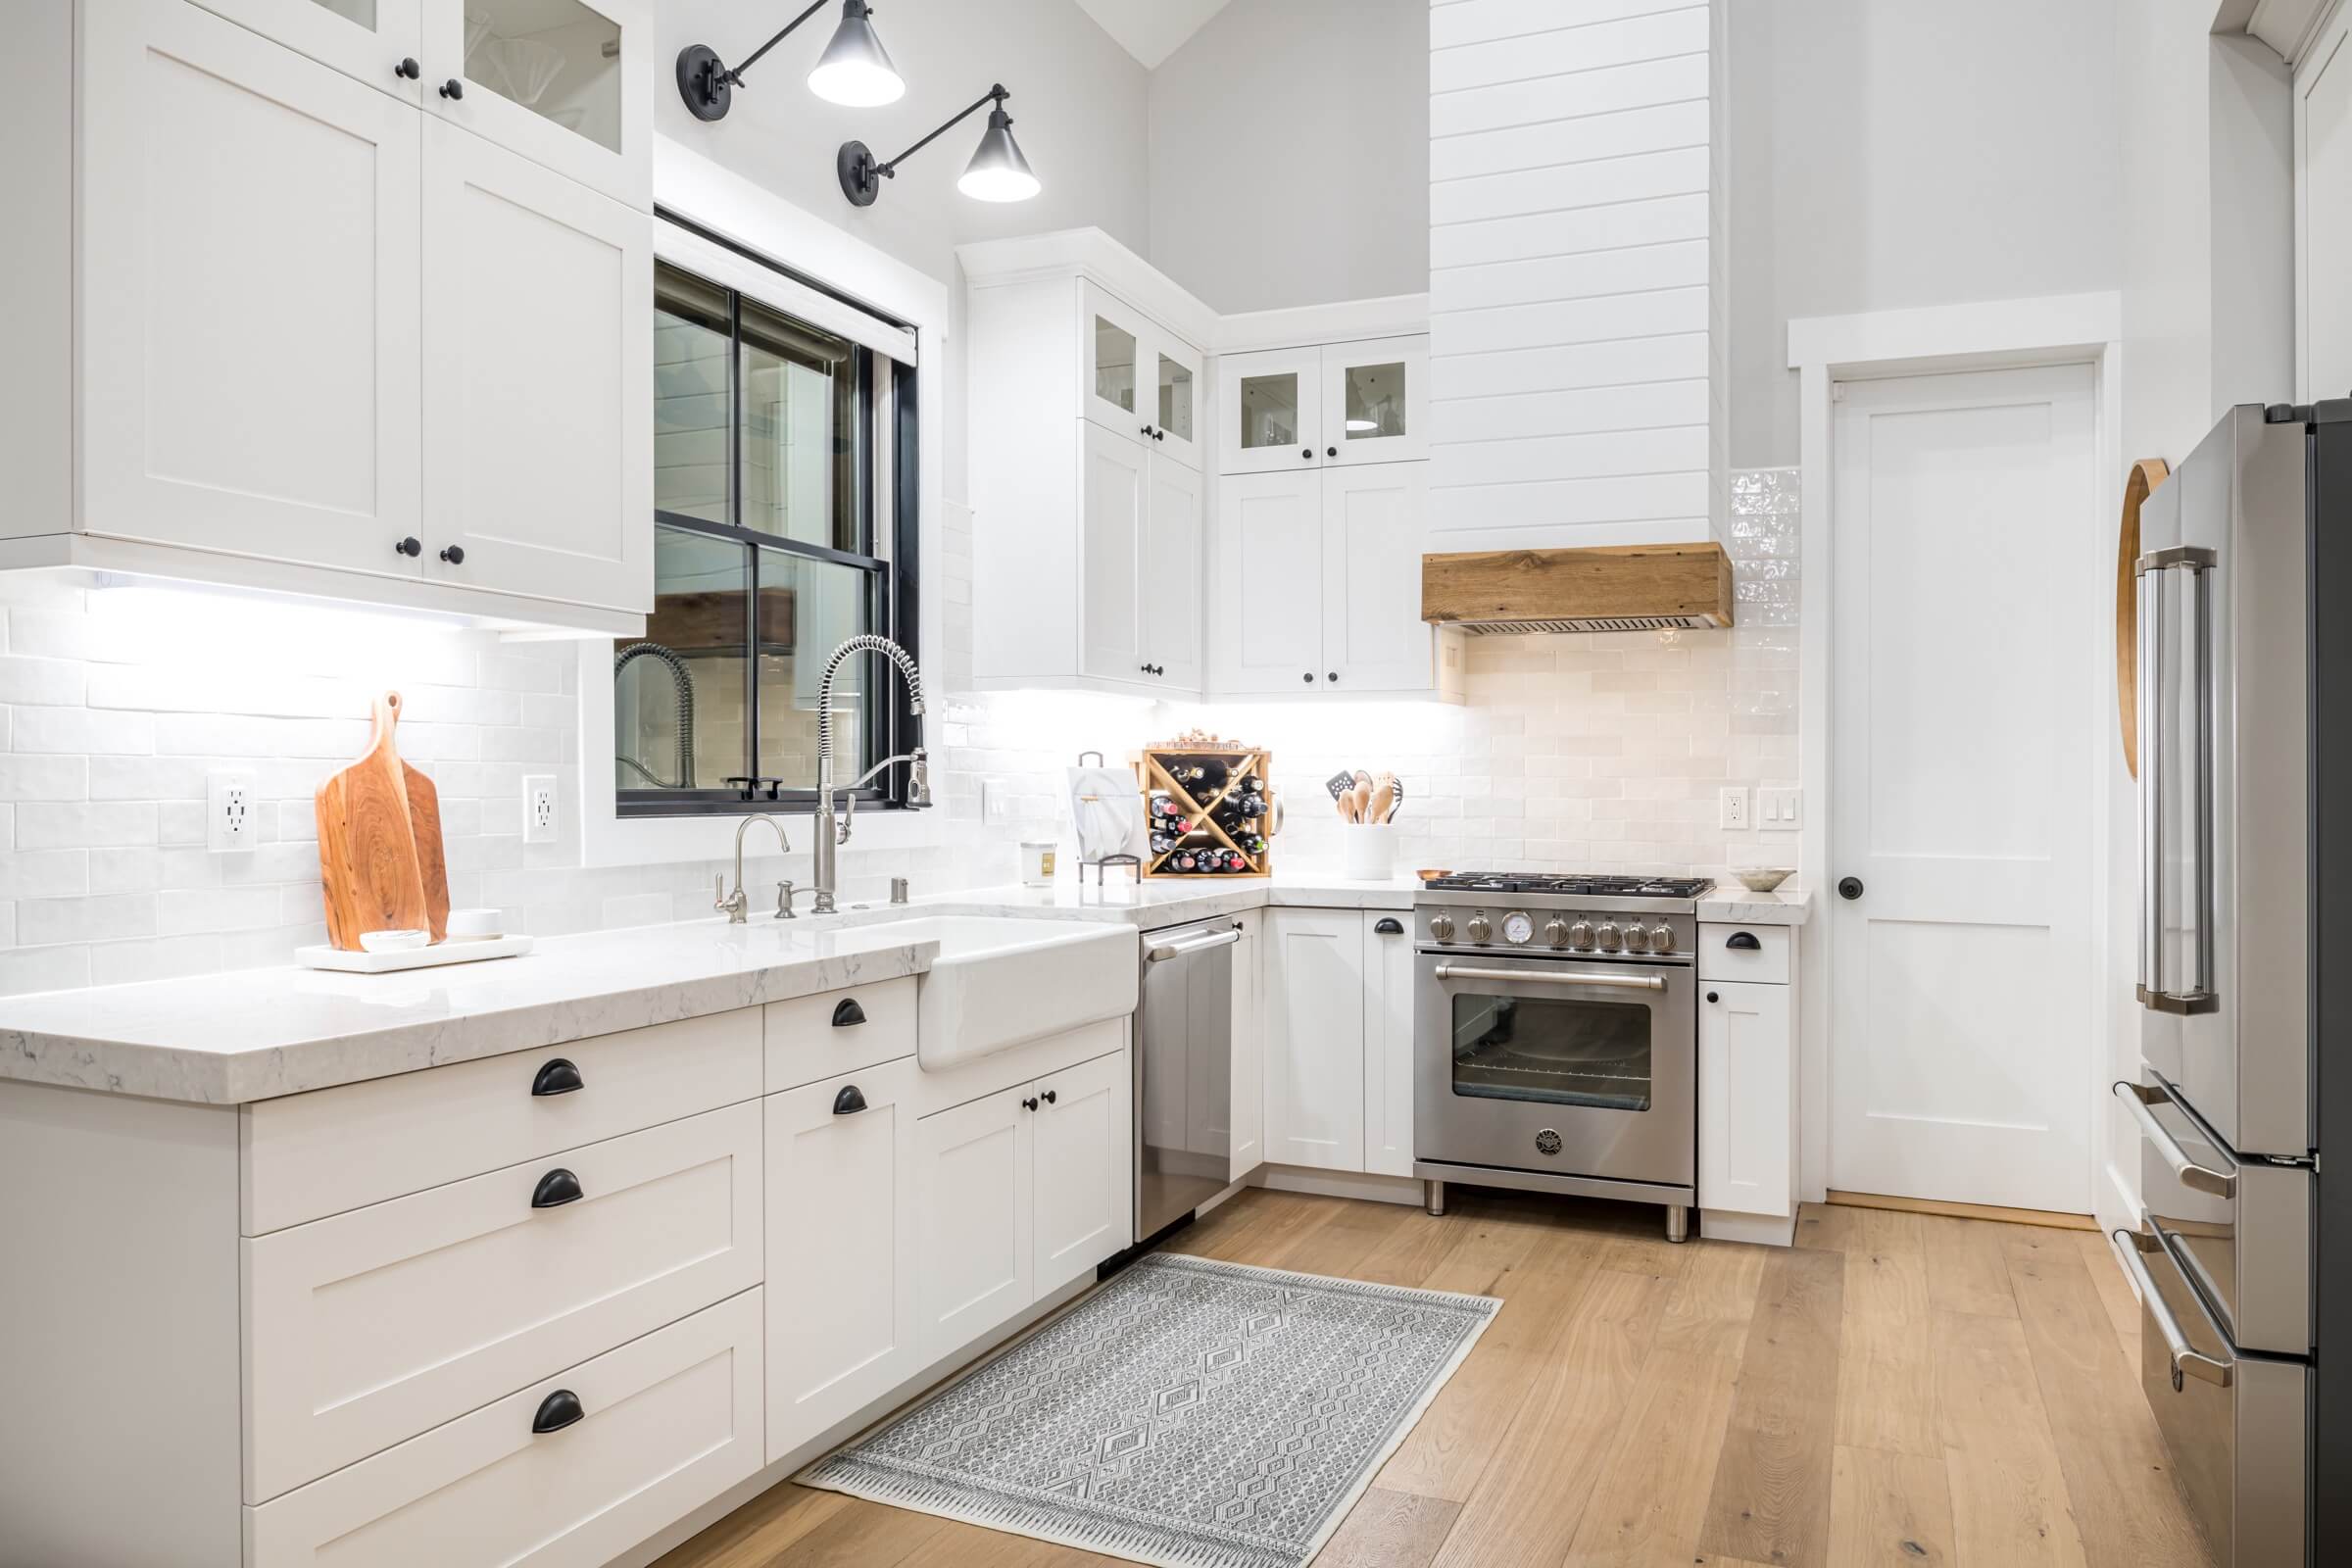 Farmhouse kitchen design from FiveWest